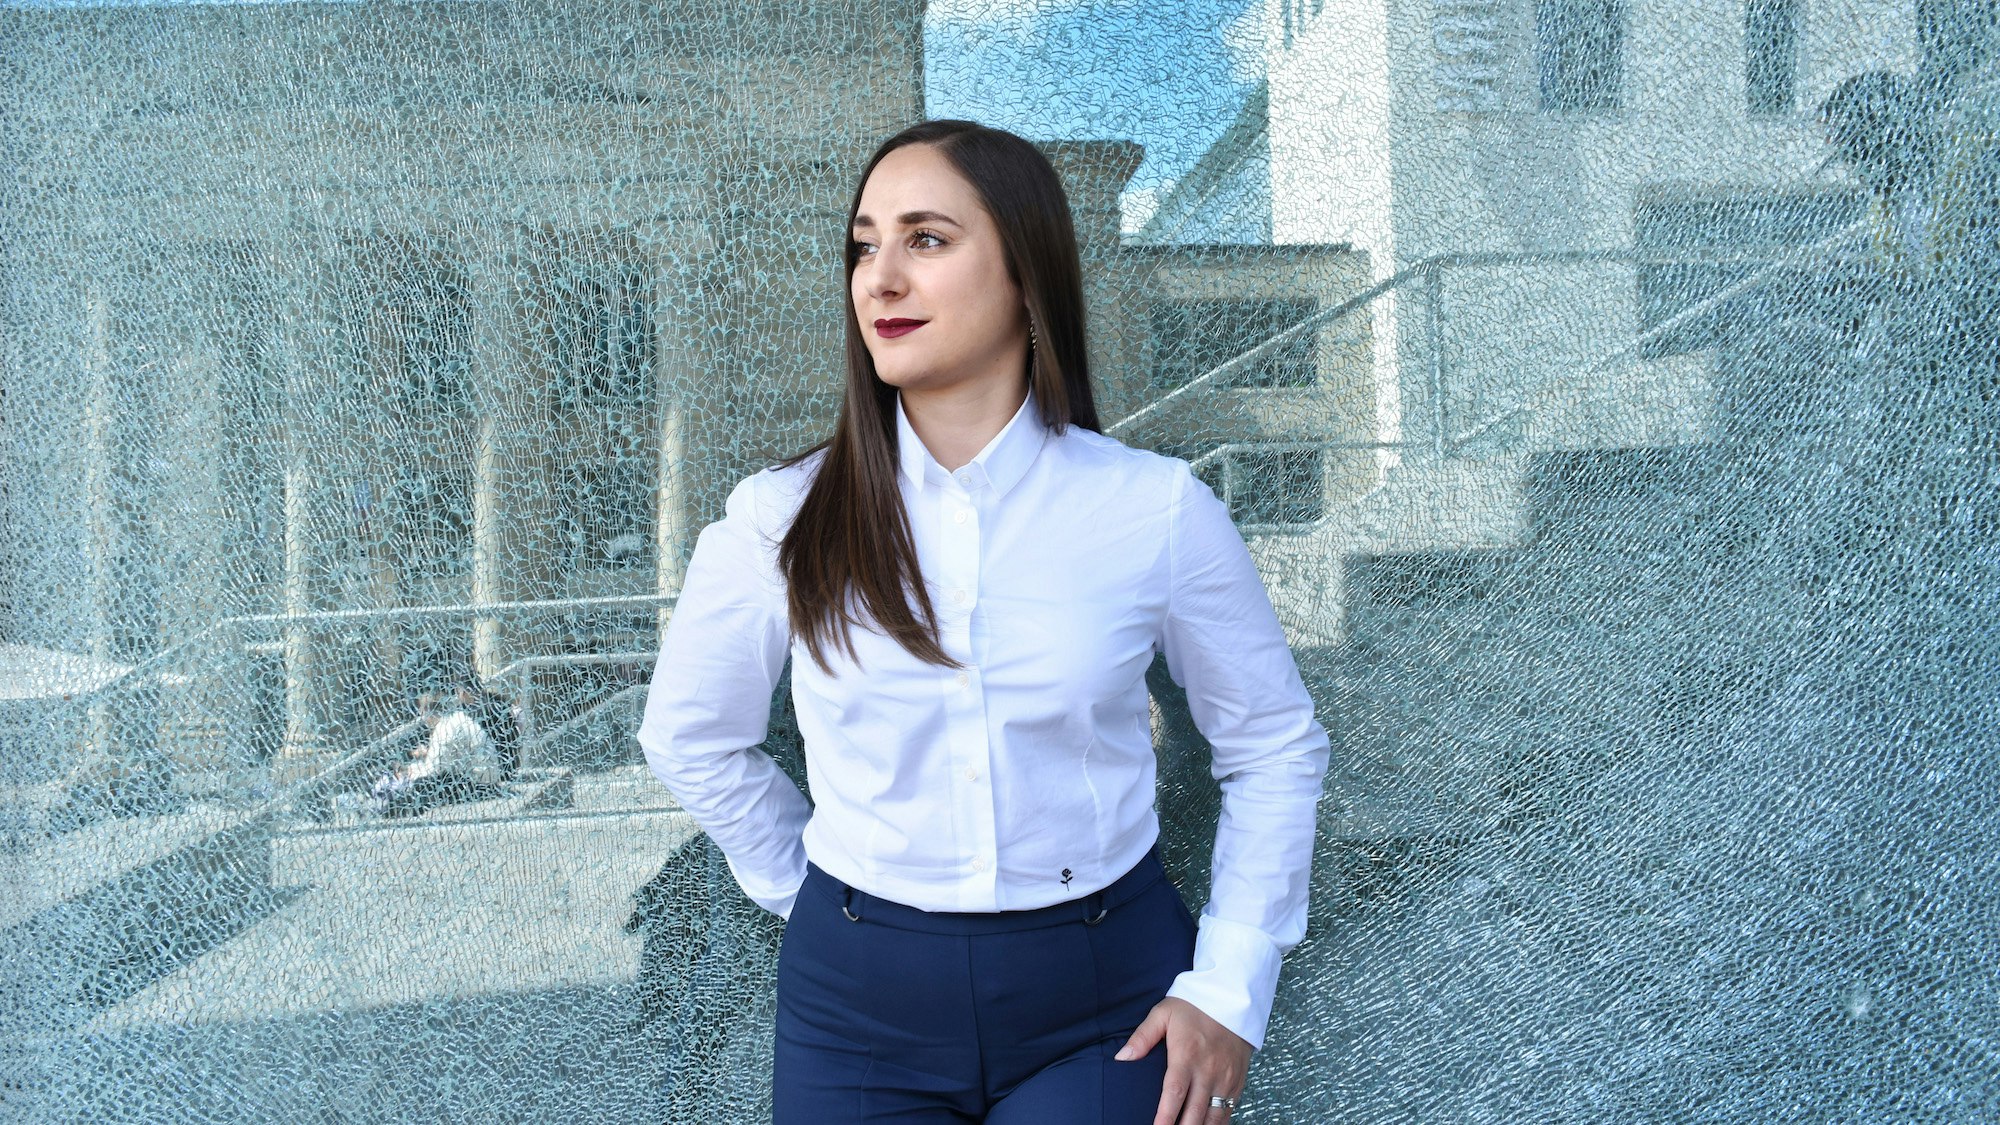 Valentina Zoffreo standing against a glass background, looking to her right, professionally dressed.